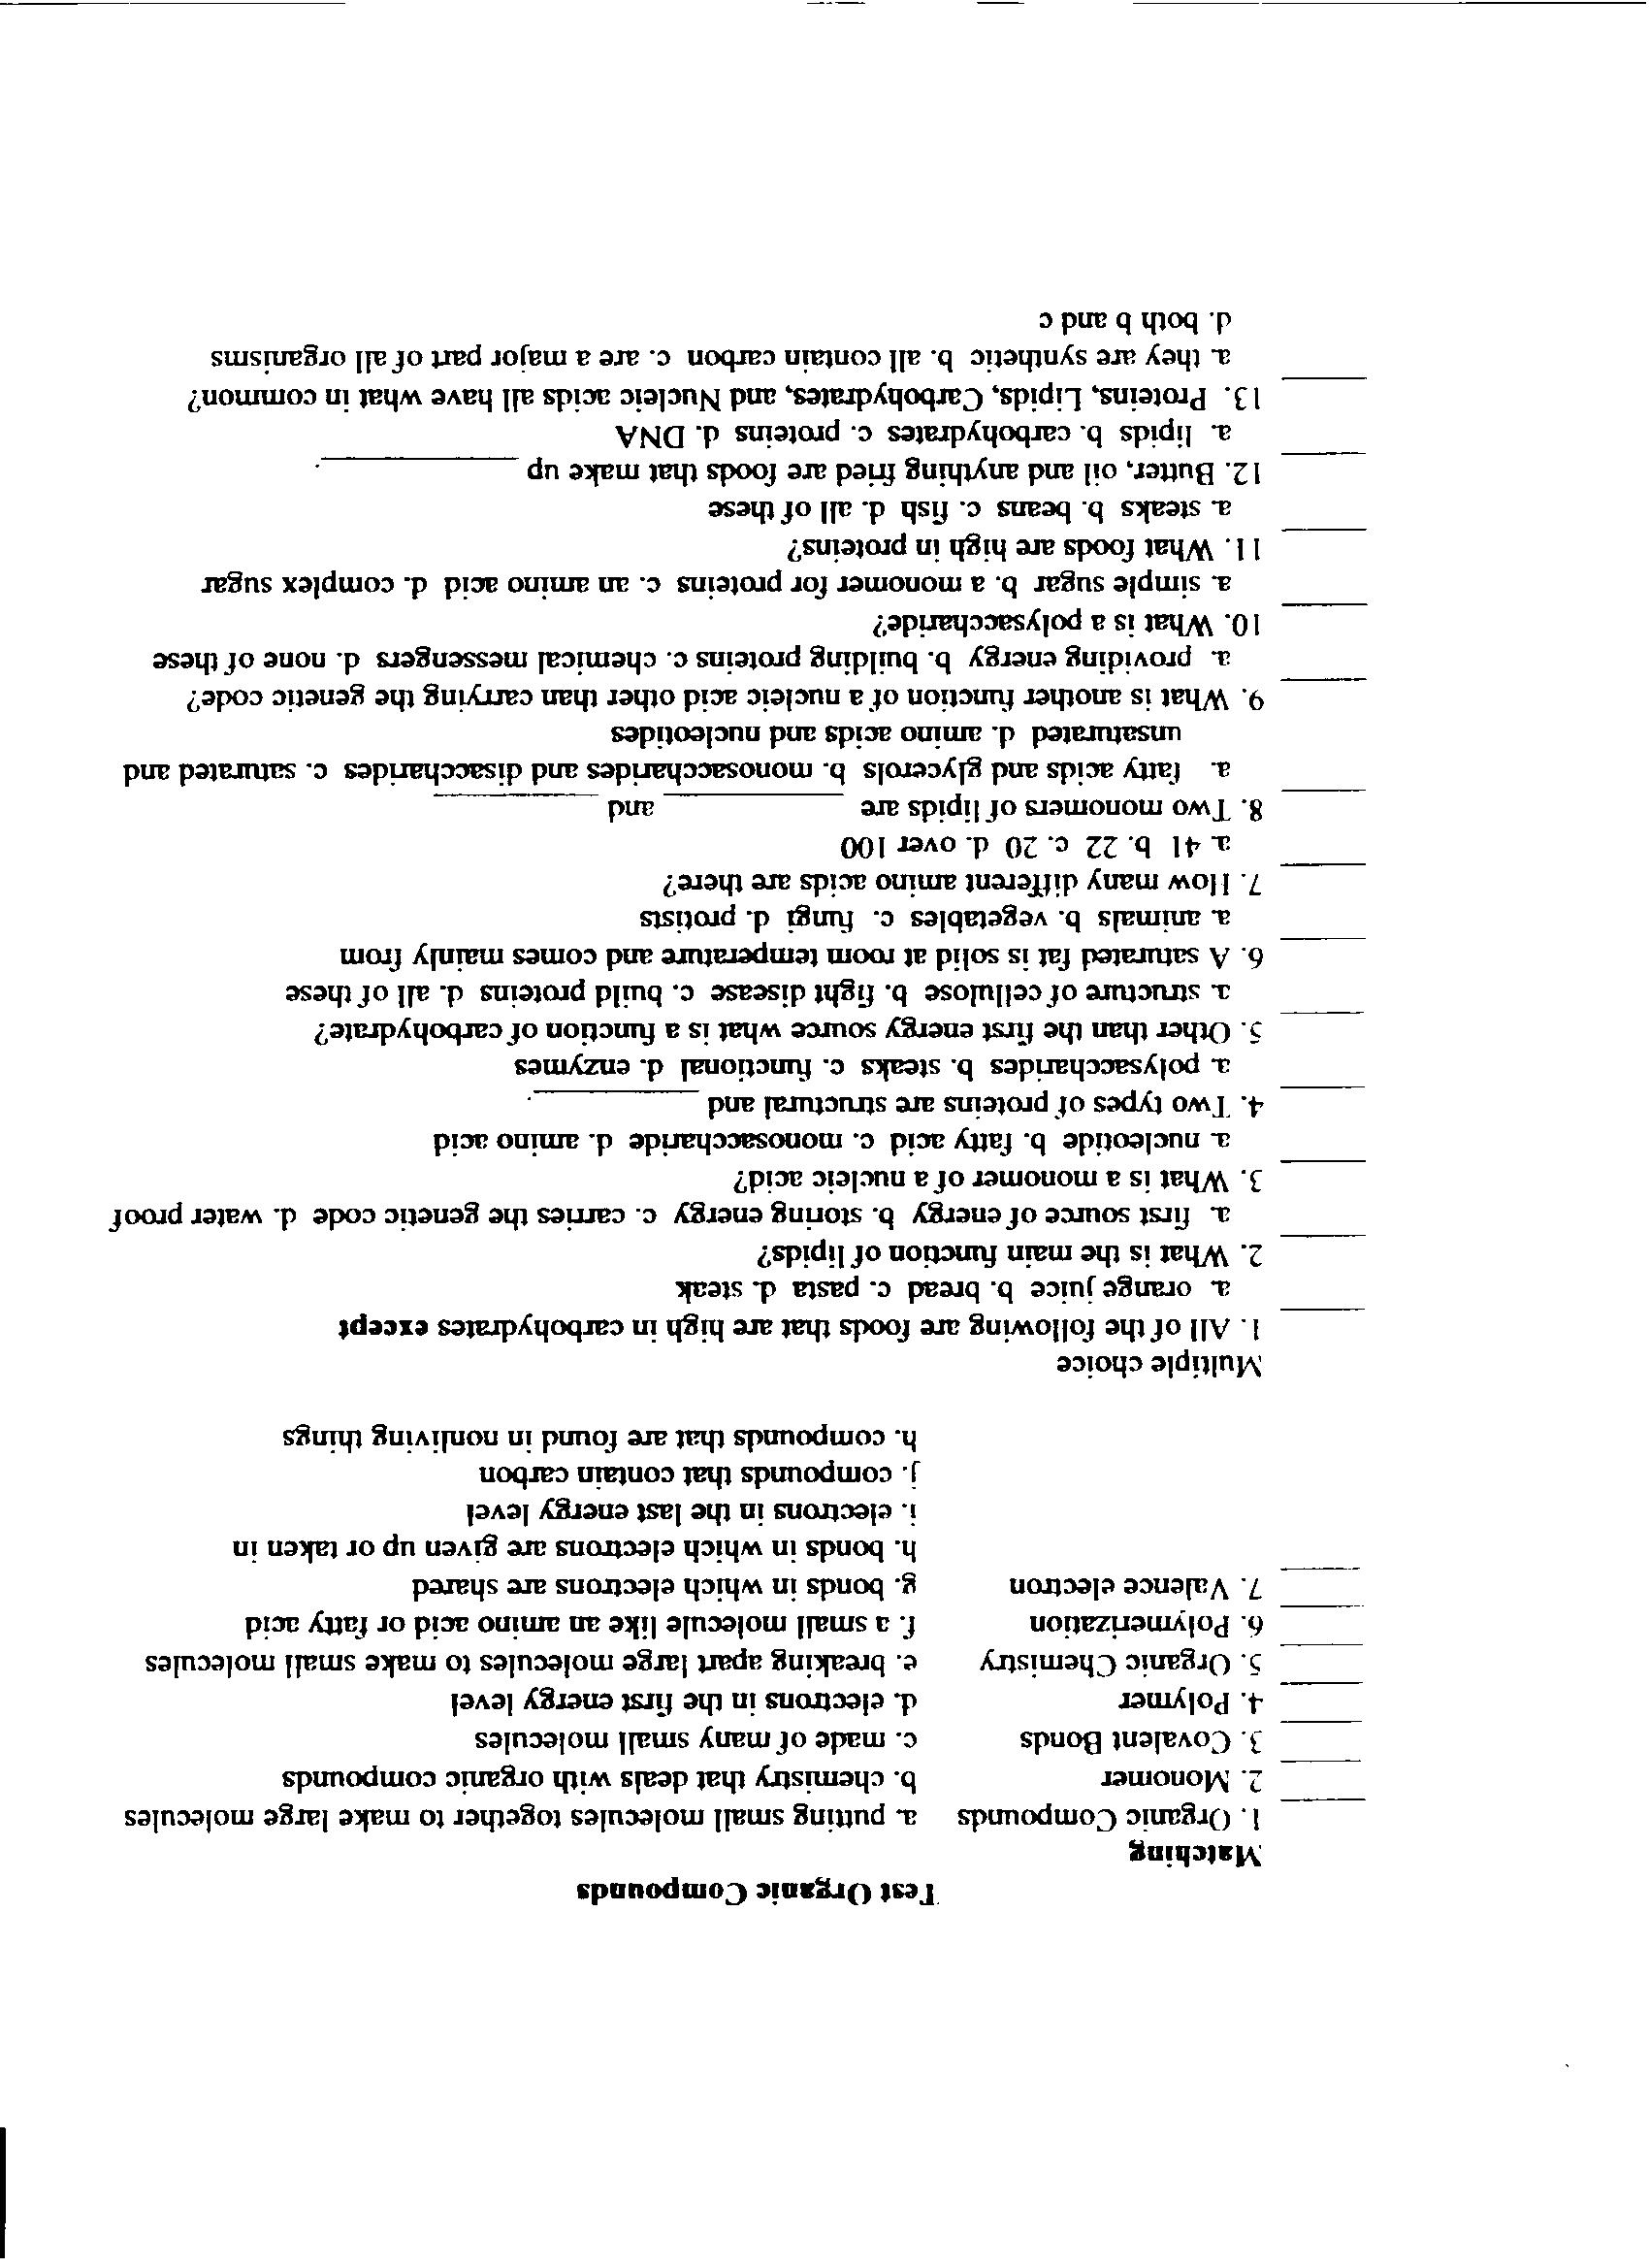 9 Best Images of Identifying Organic Compounds Worksheet  Organic Chemistry Functional Groups 